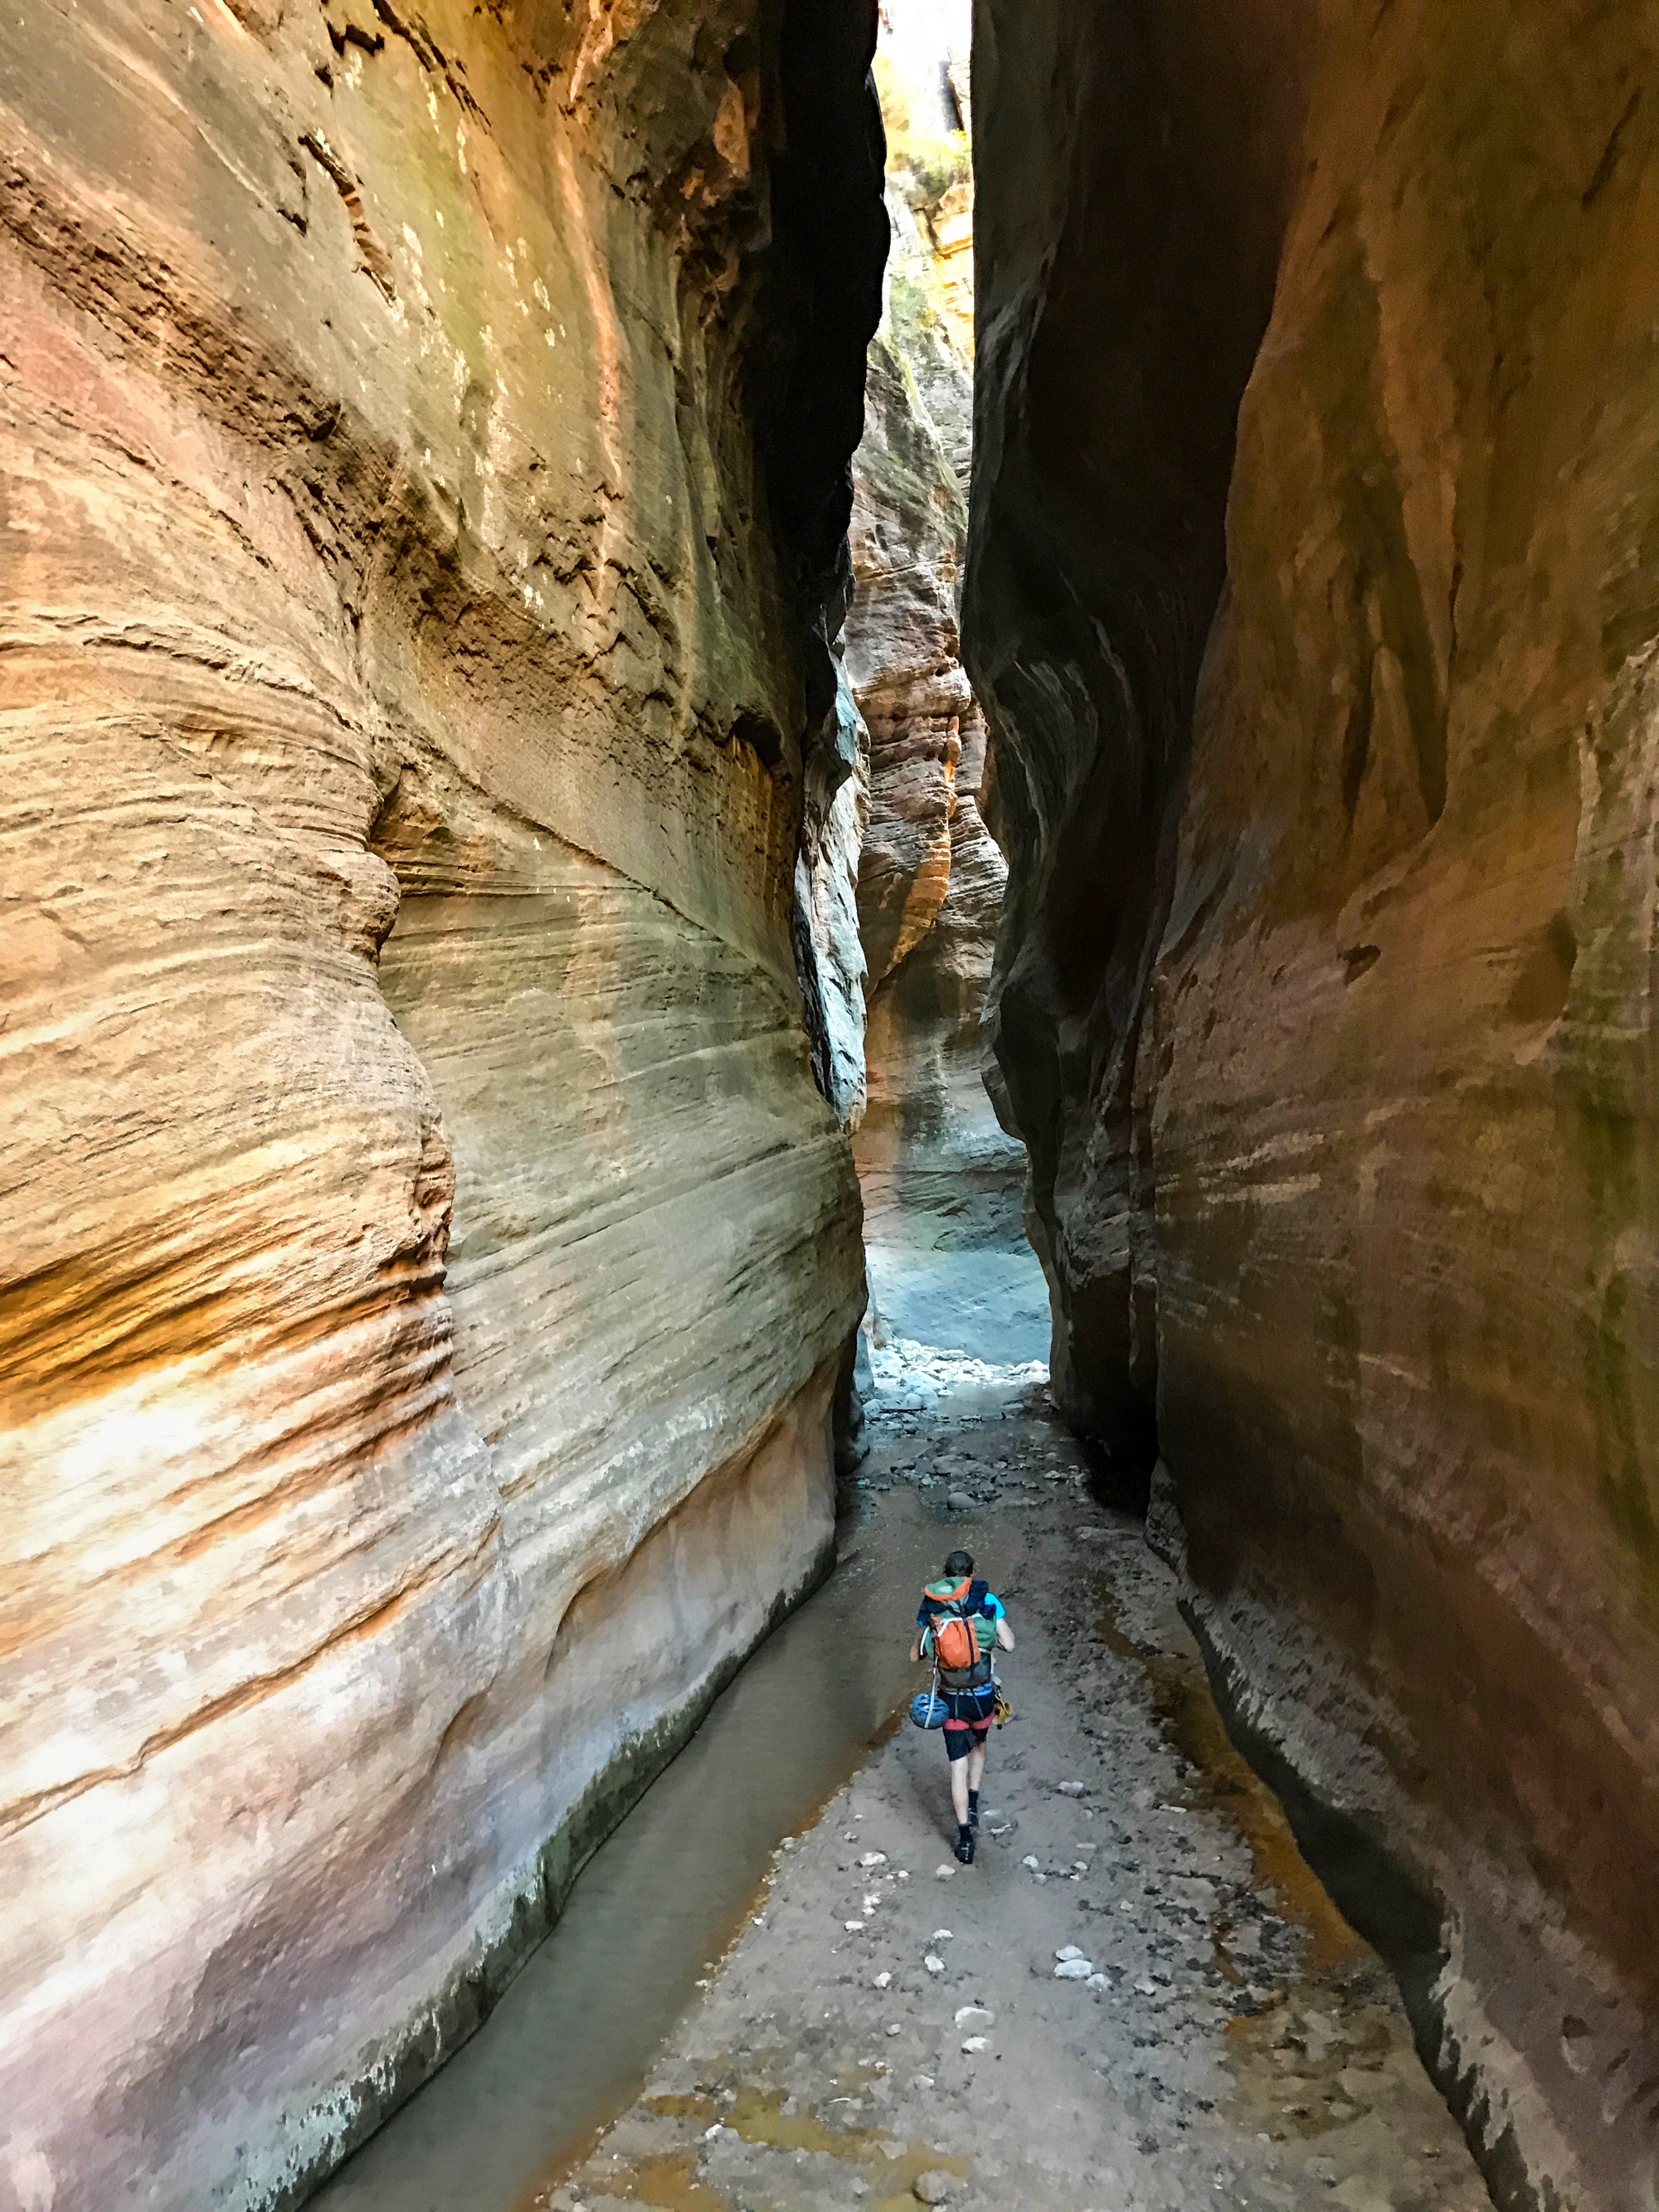 Canyoneering in Orderville.